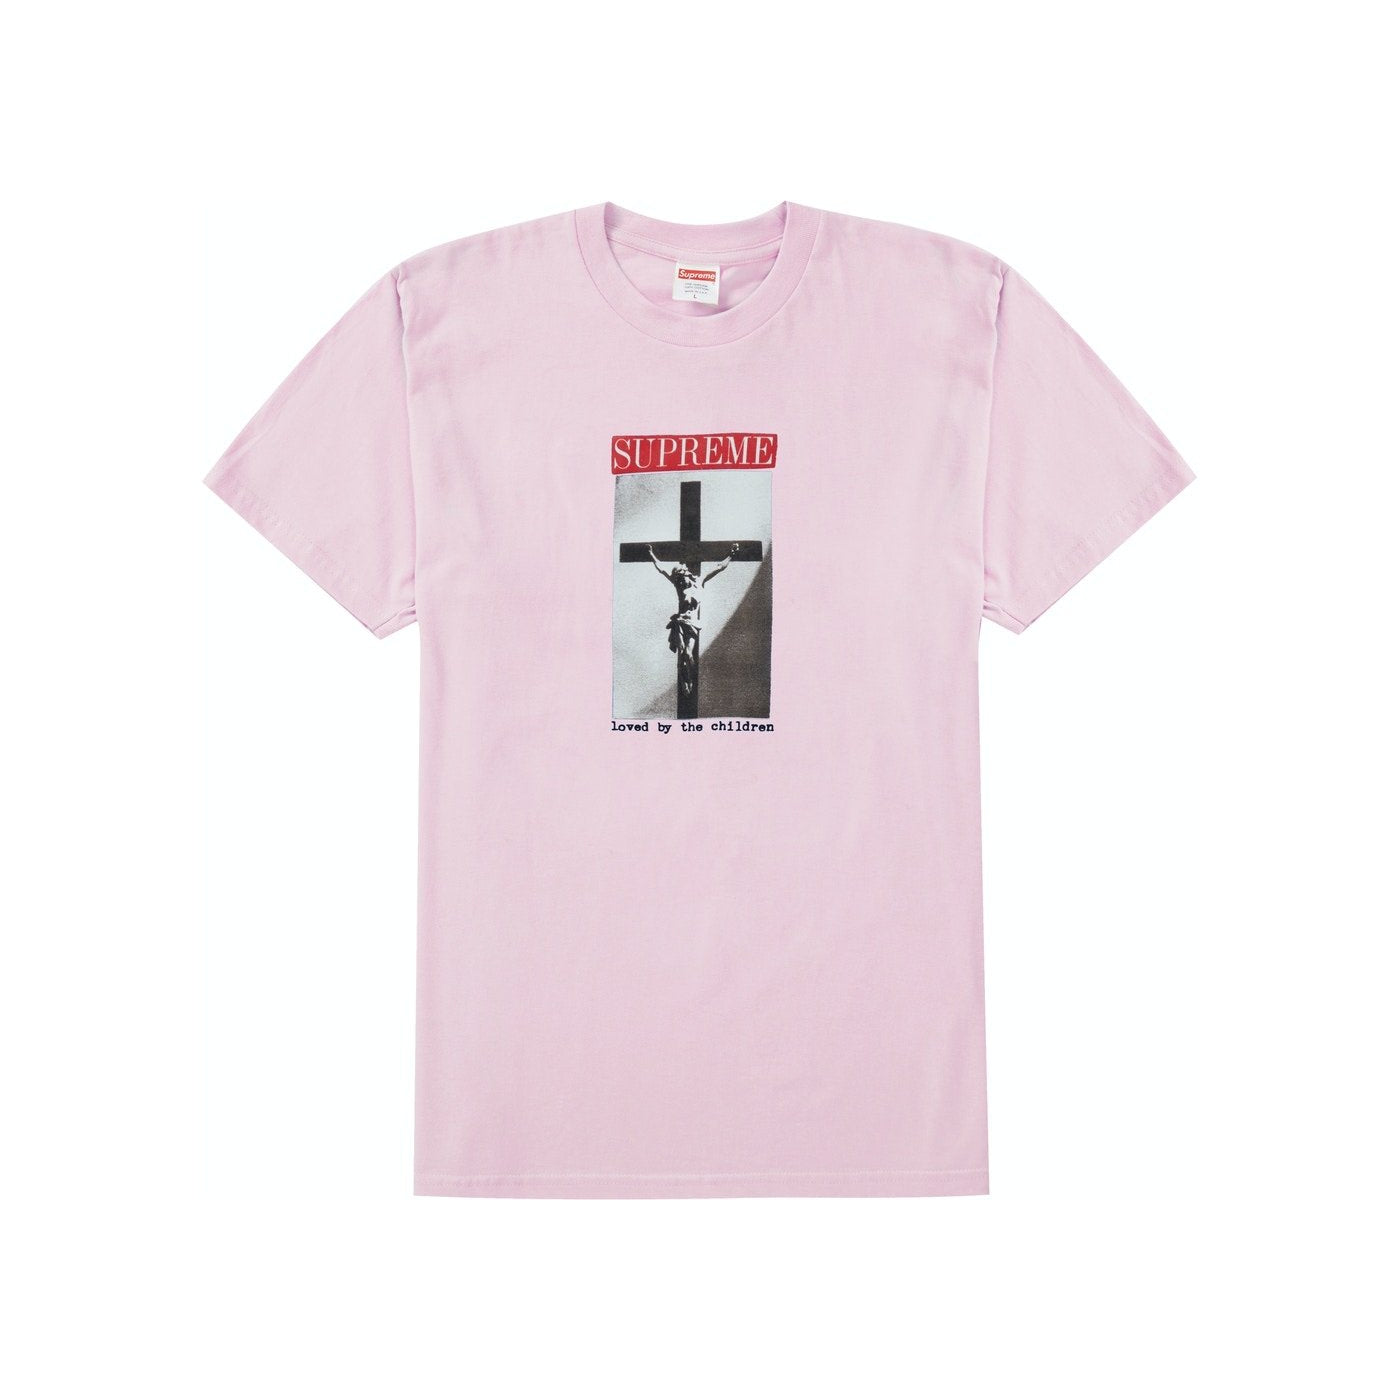 Supreme Loved By the Children Tee Pink SS20 - Centrall Online